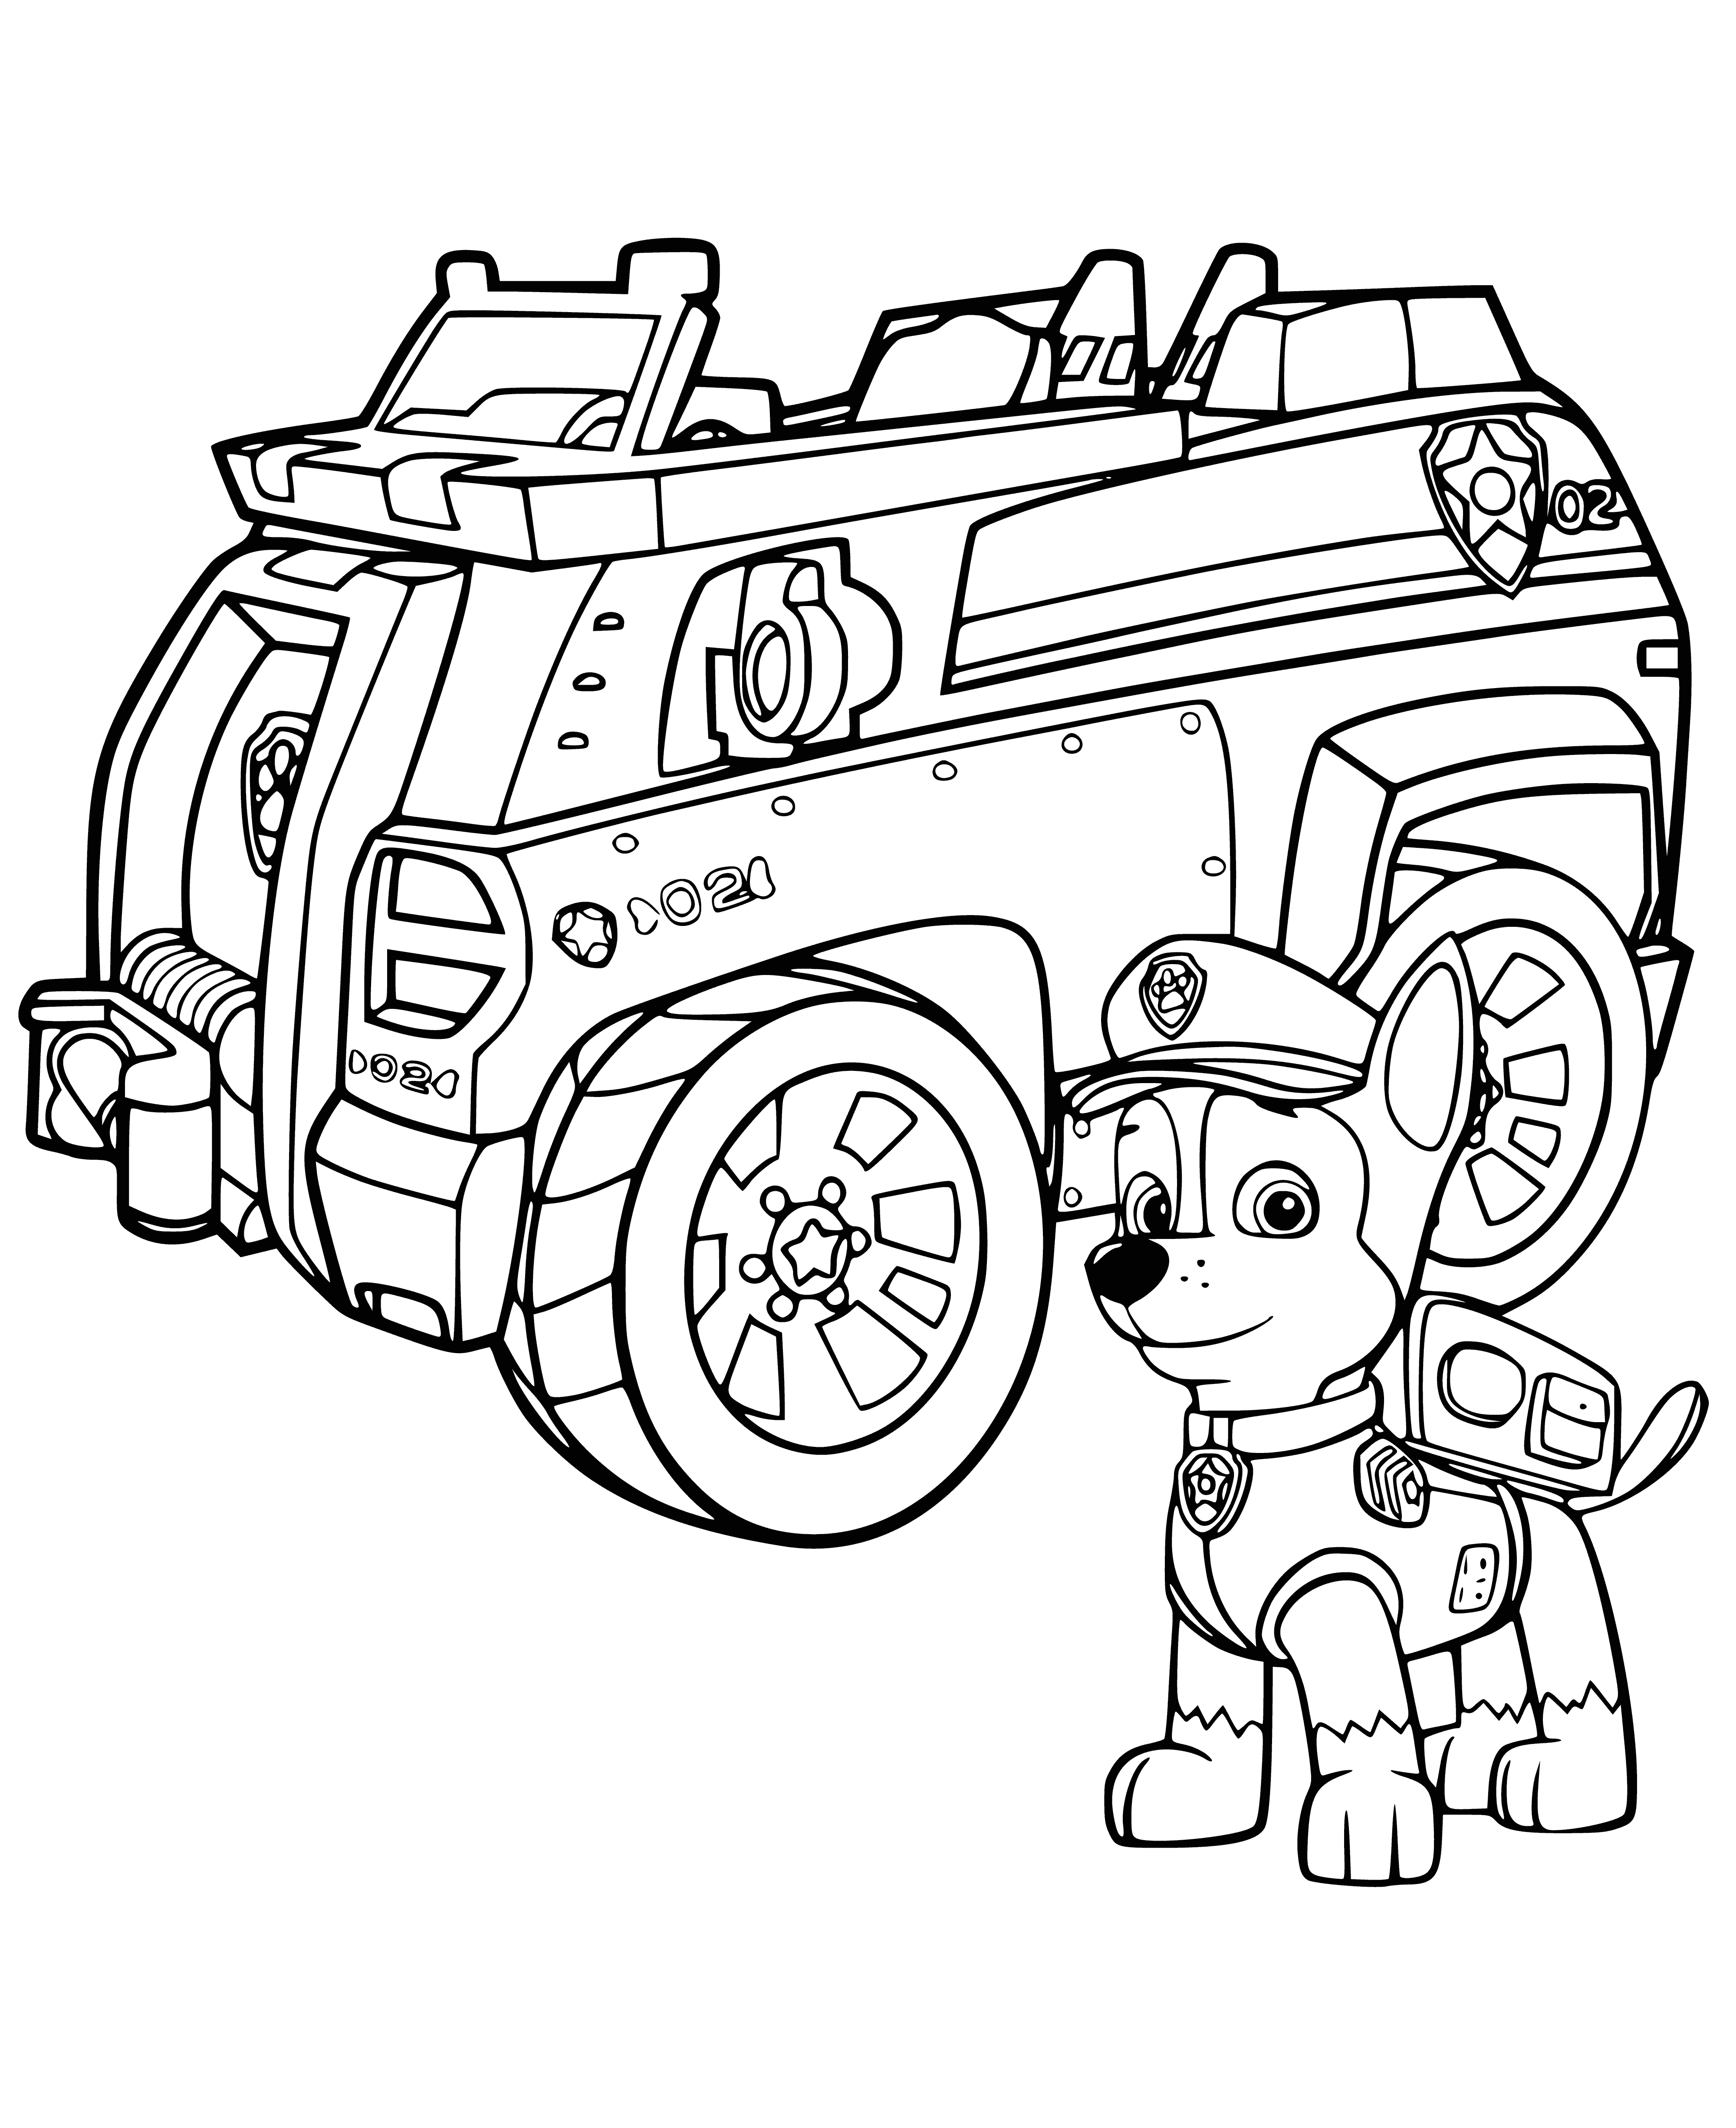 coloring page: Racer is ready to help friends in powerful Patrol car with speed! #race #gooddeeds